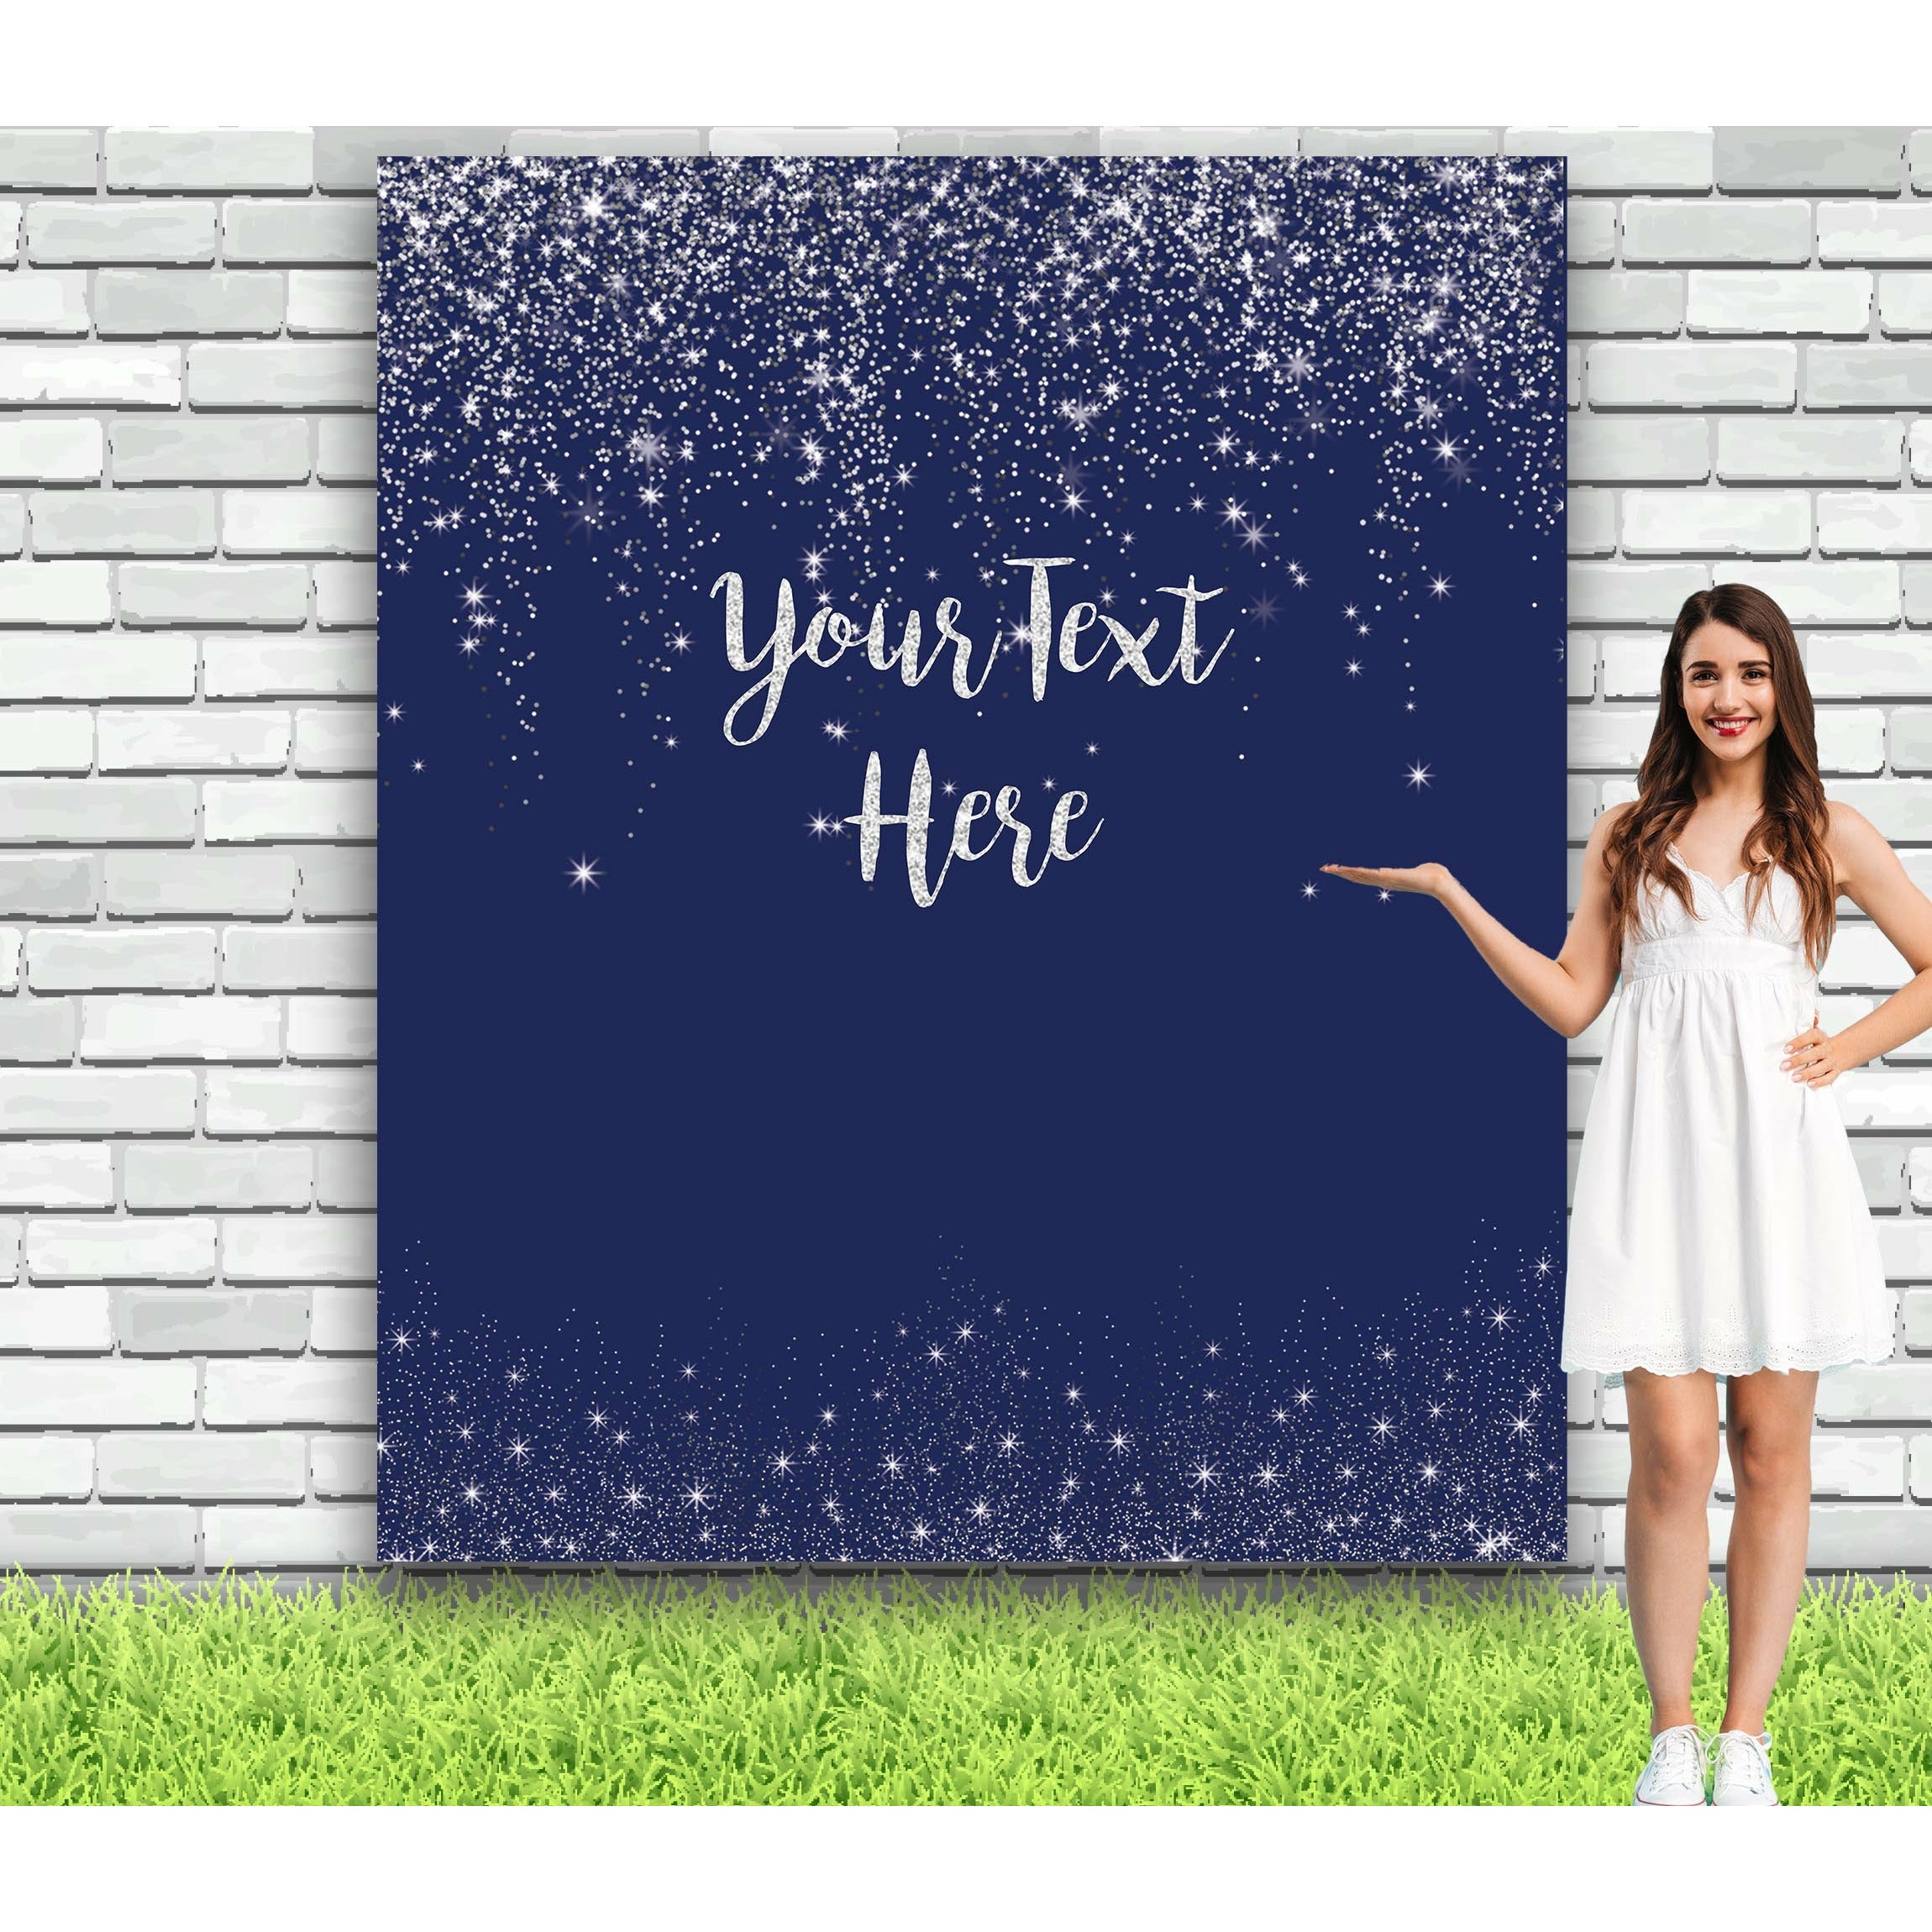 Blue and Silver Glitter Backdrop